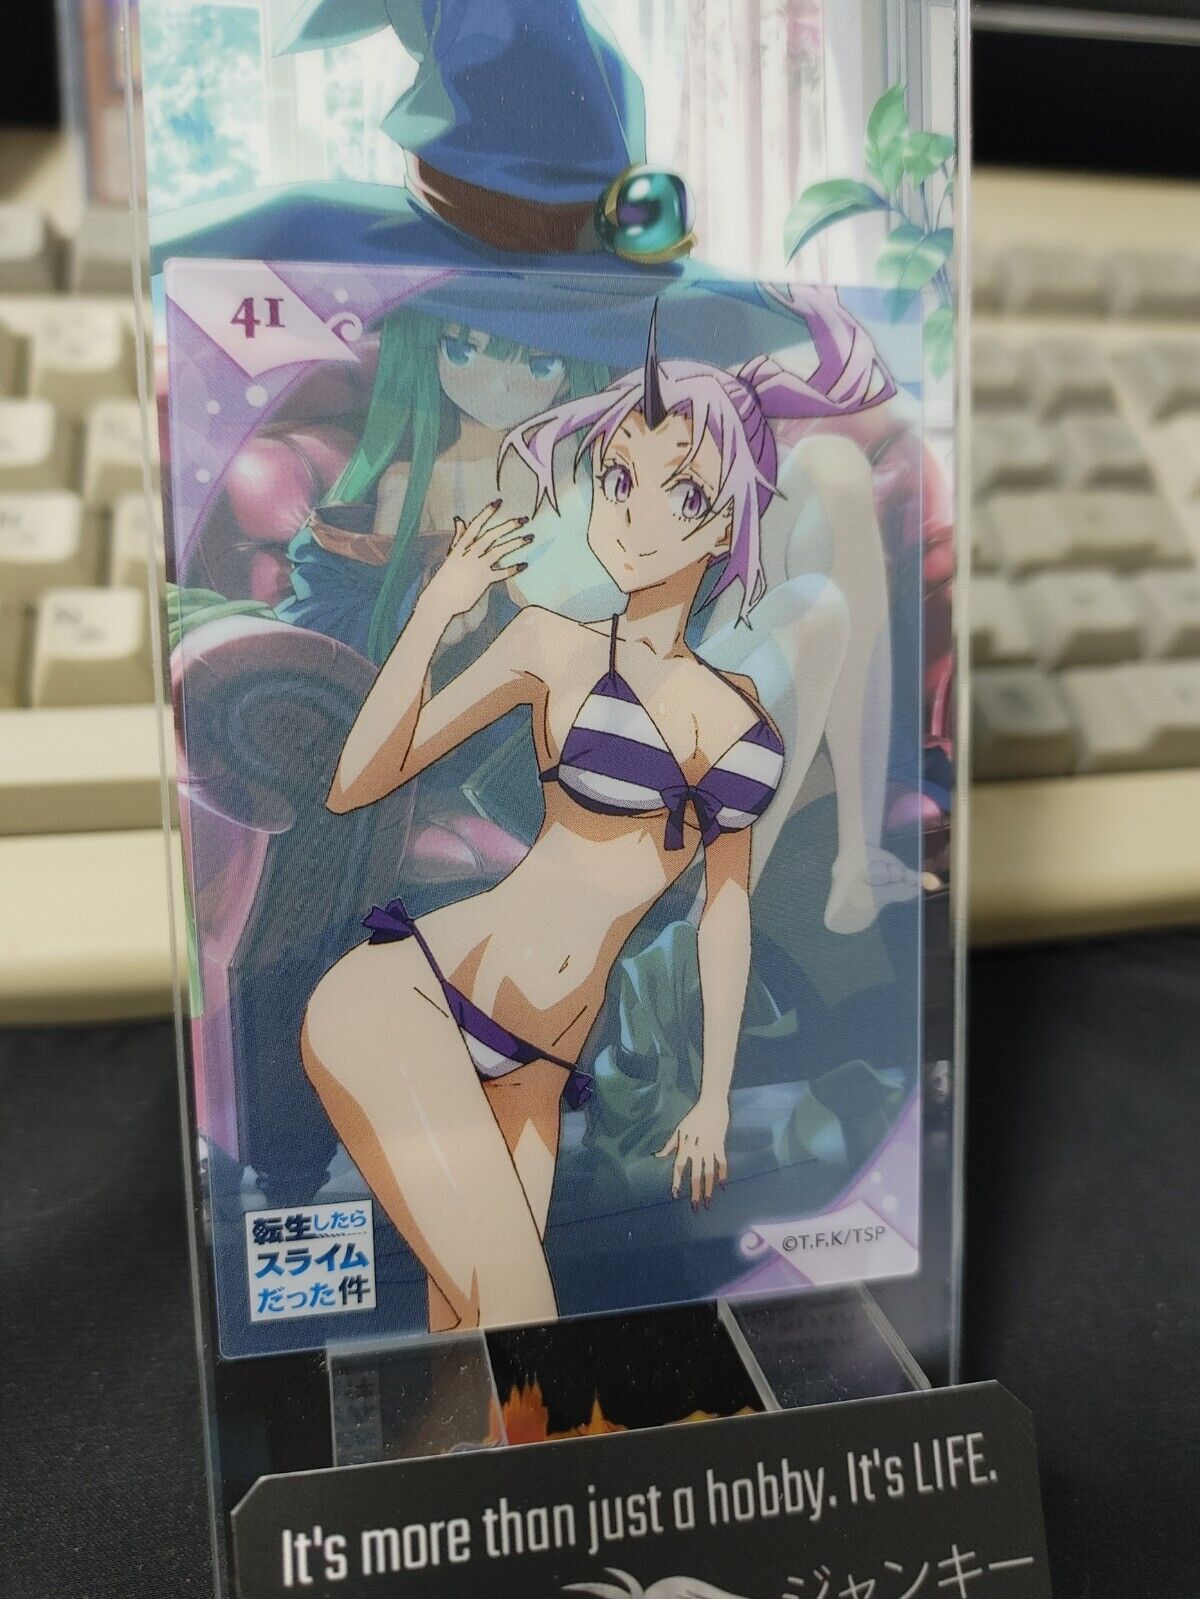 That Time I Got Reincarnated As A Slime Clear Card Collection Shion No. 41 Japan